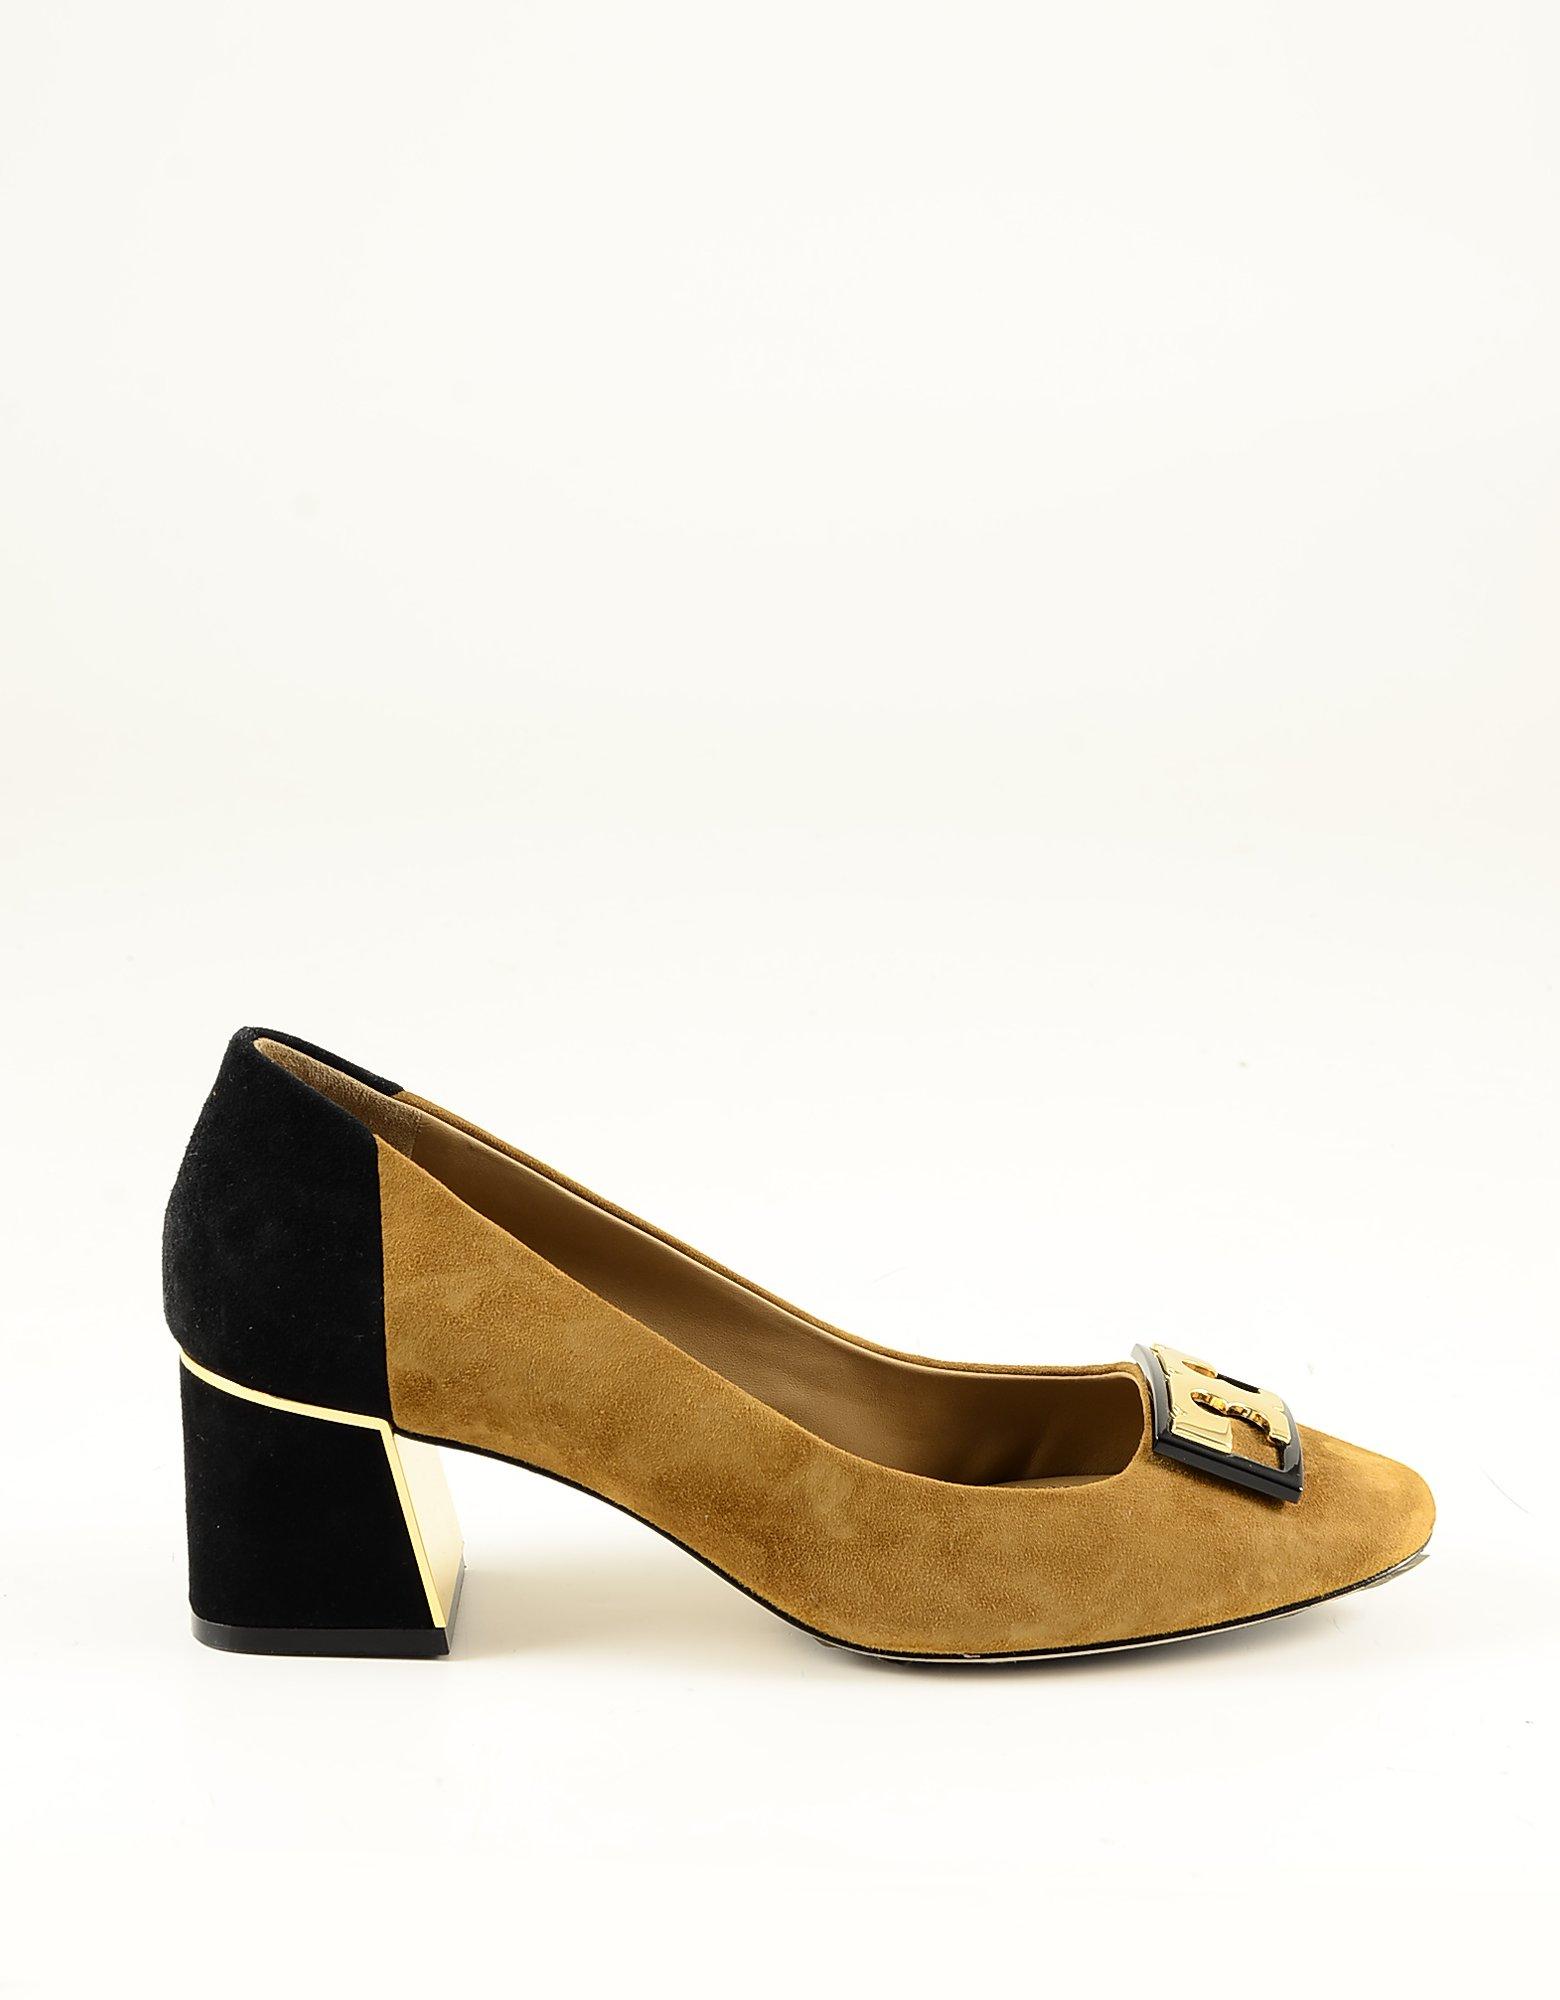 Tory Burch Camel and Black Suede Pumps Shoes 38 IT/EU at FORZIERI